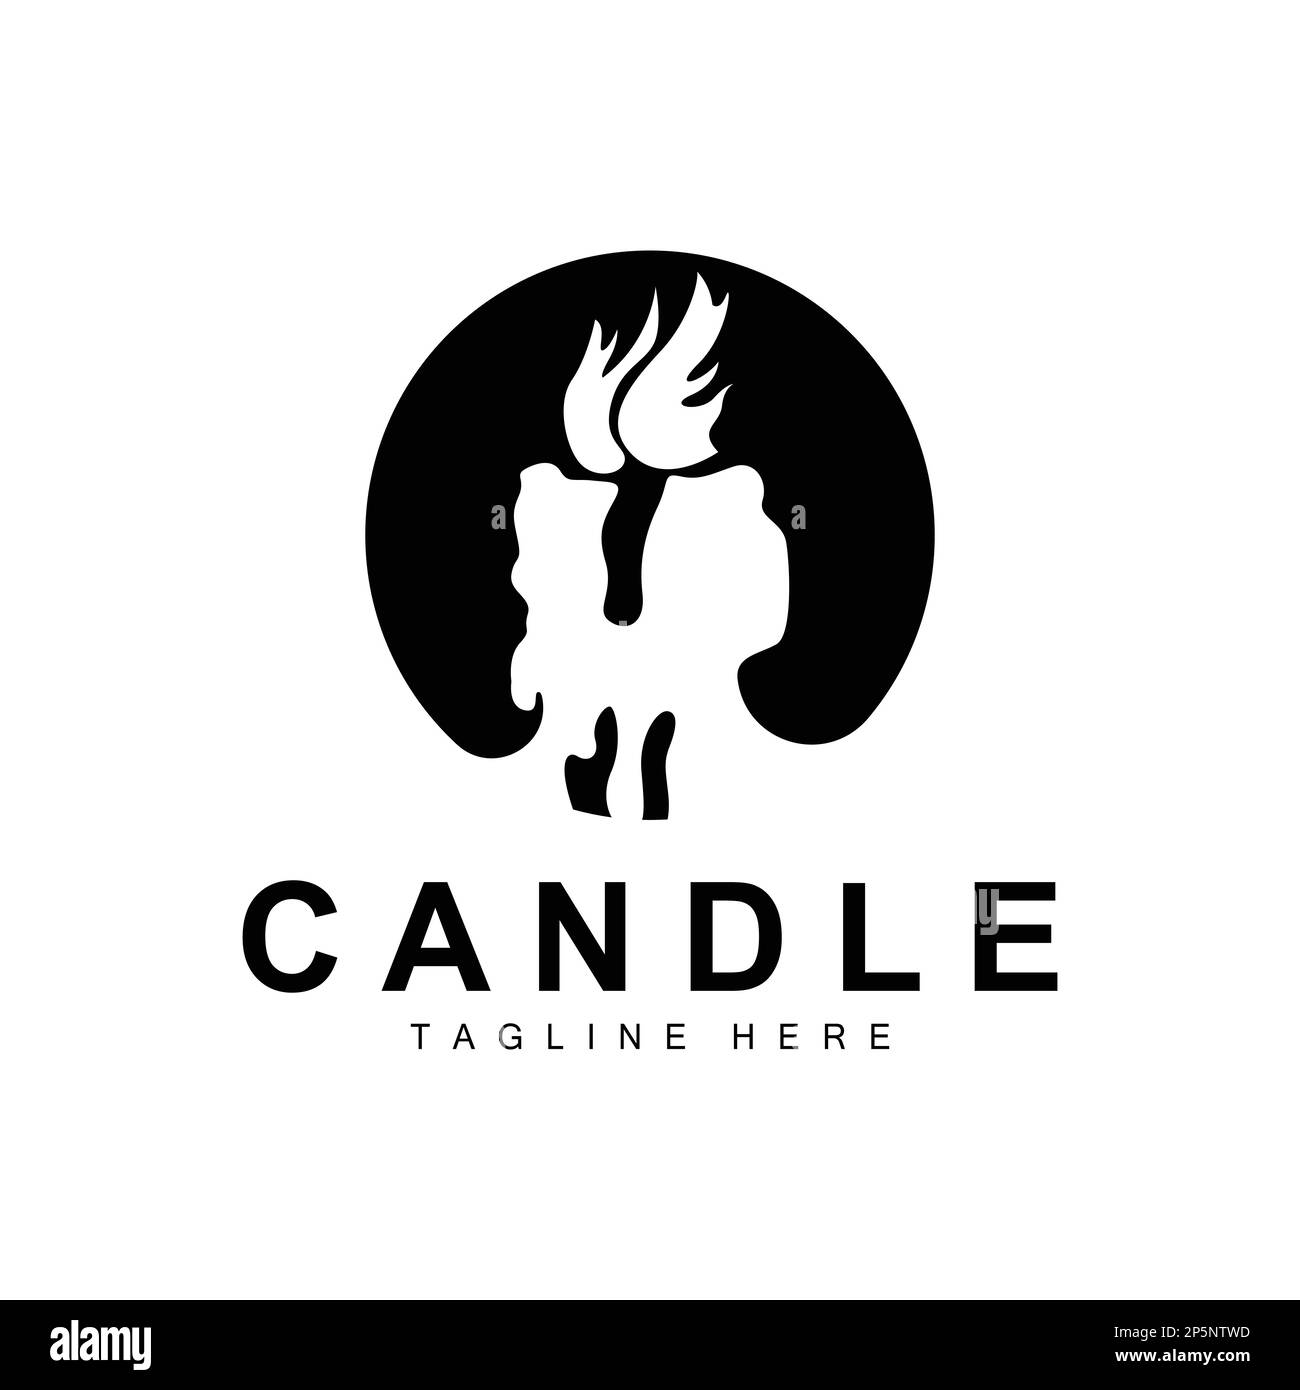 Candle Logo, Flame Lighting Design, Burning luxury Vector, Illustration Template Icon Stock Vector